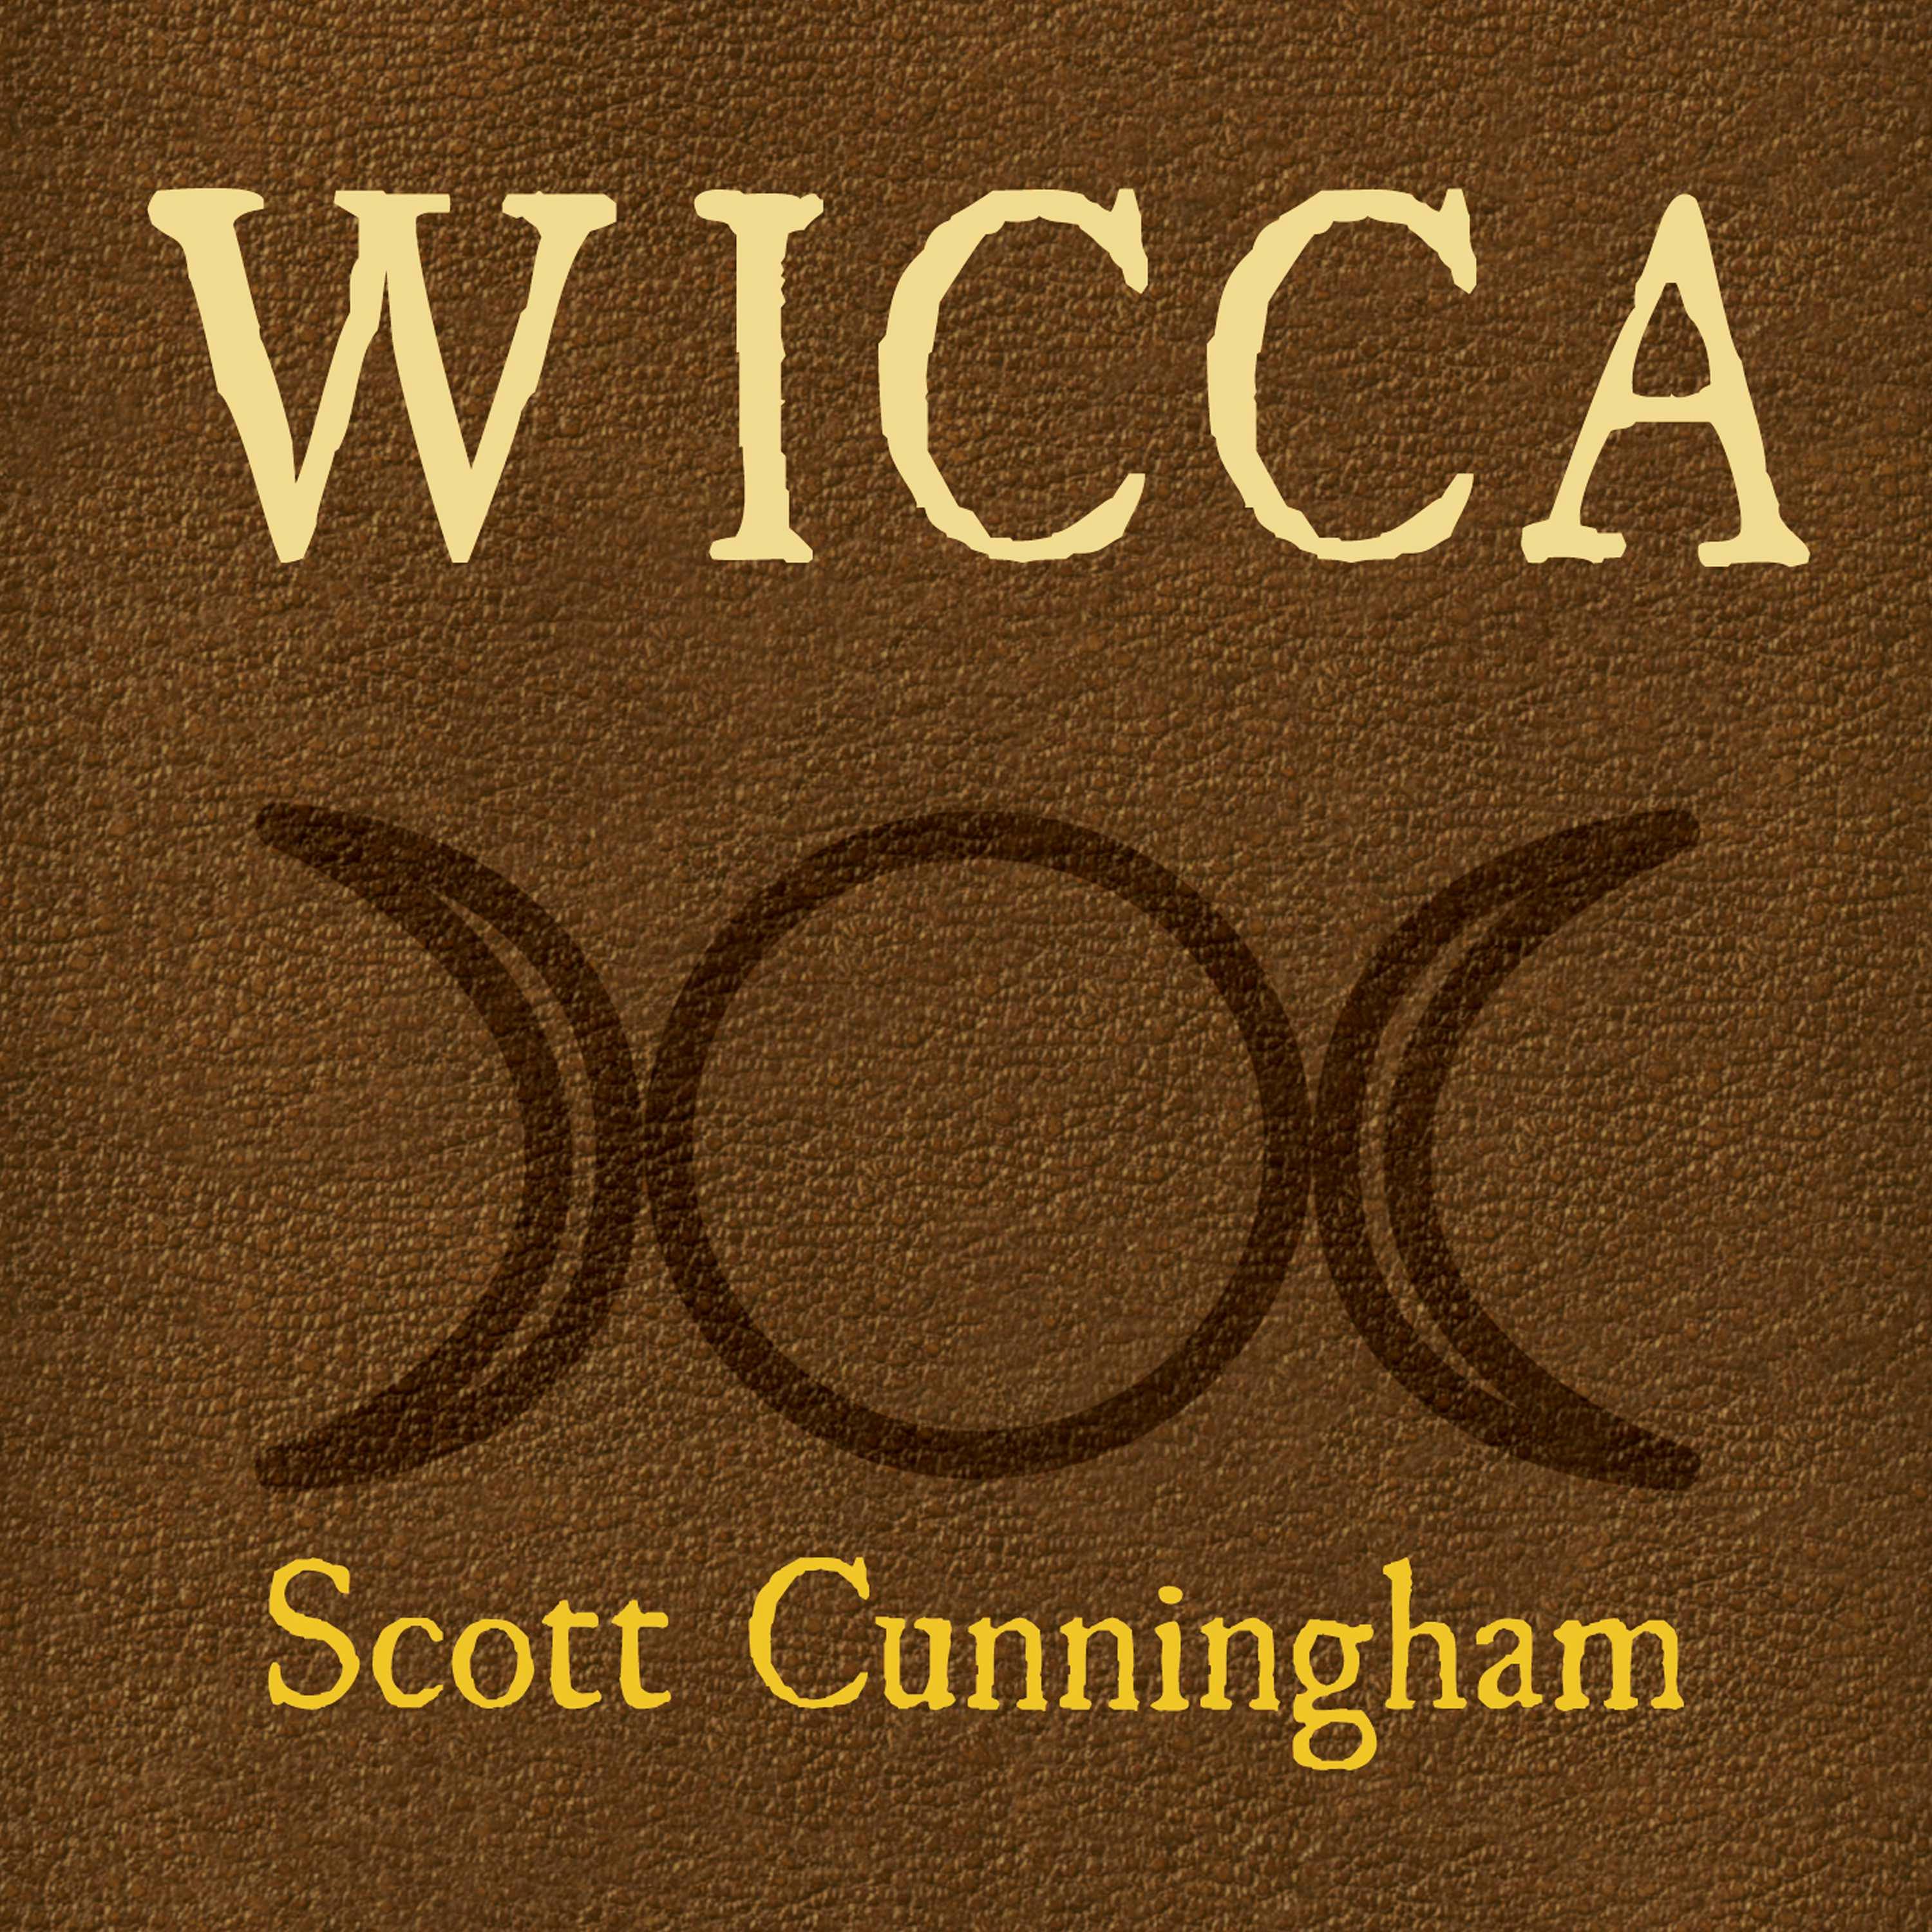 Wicca: A Guide for the Solitary Practitioner - undefined